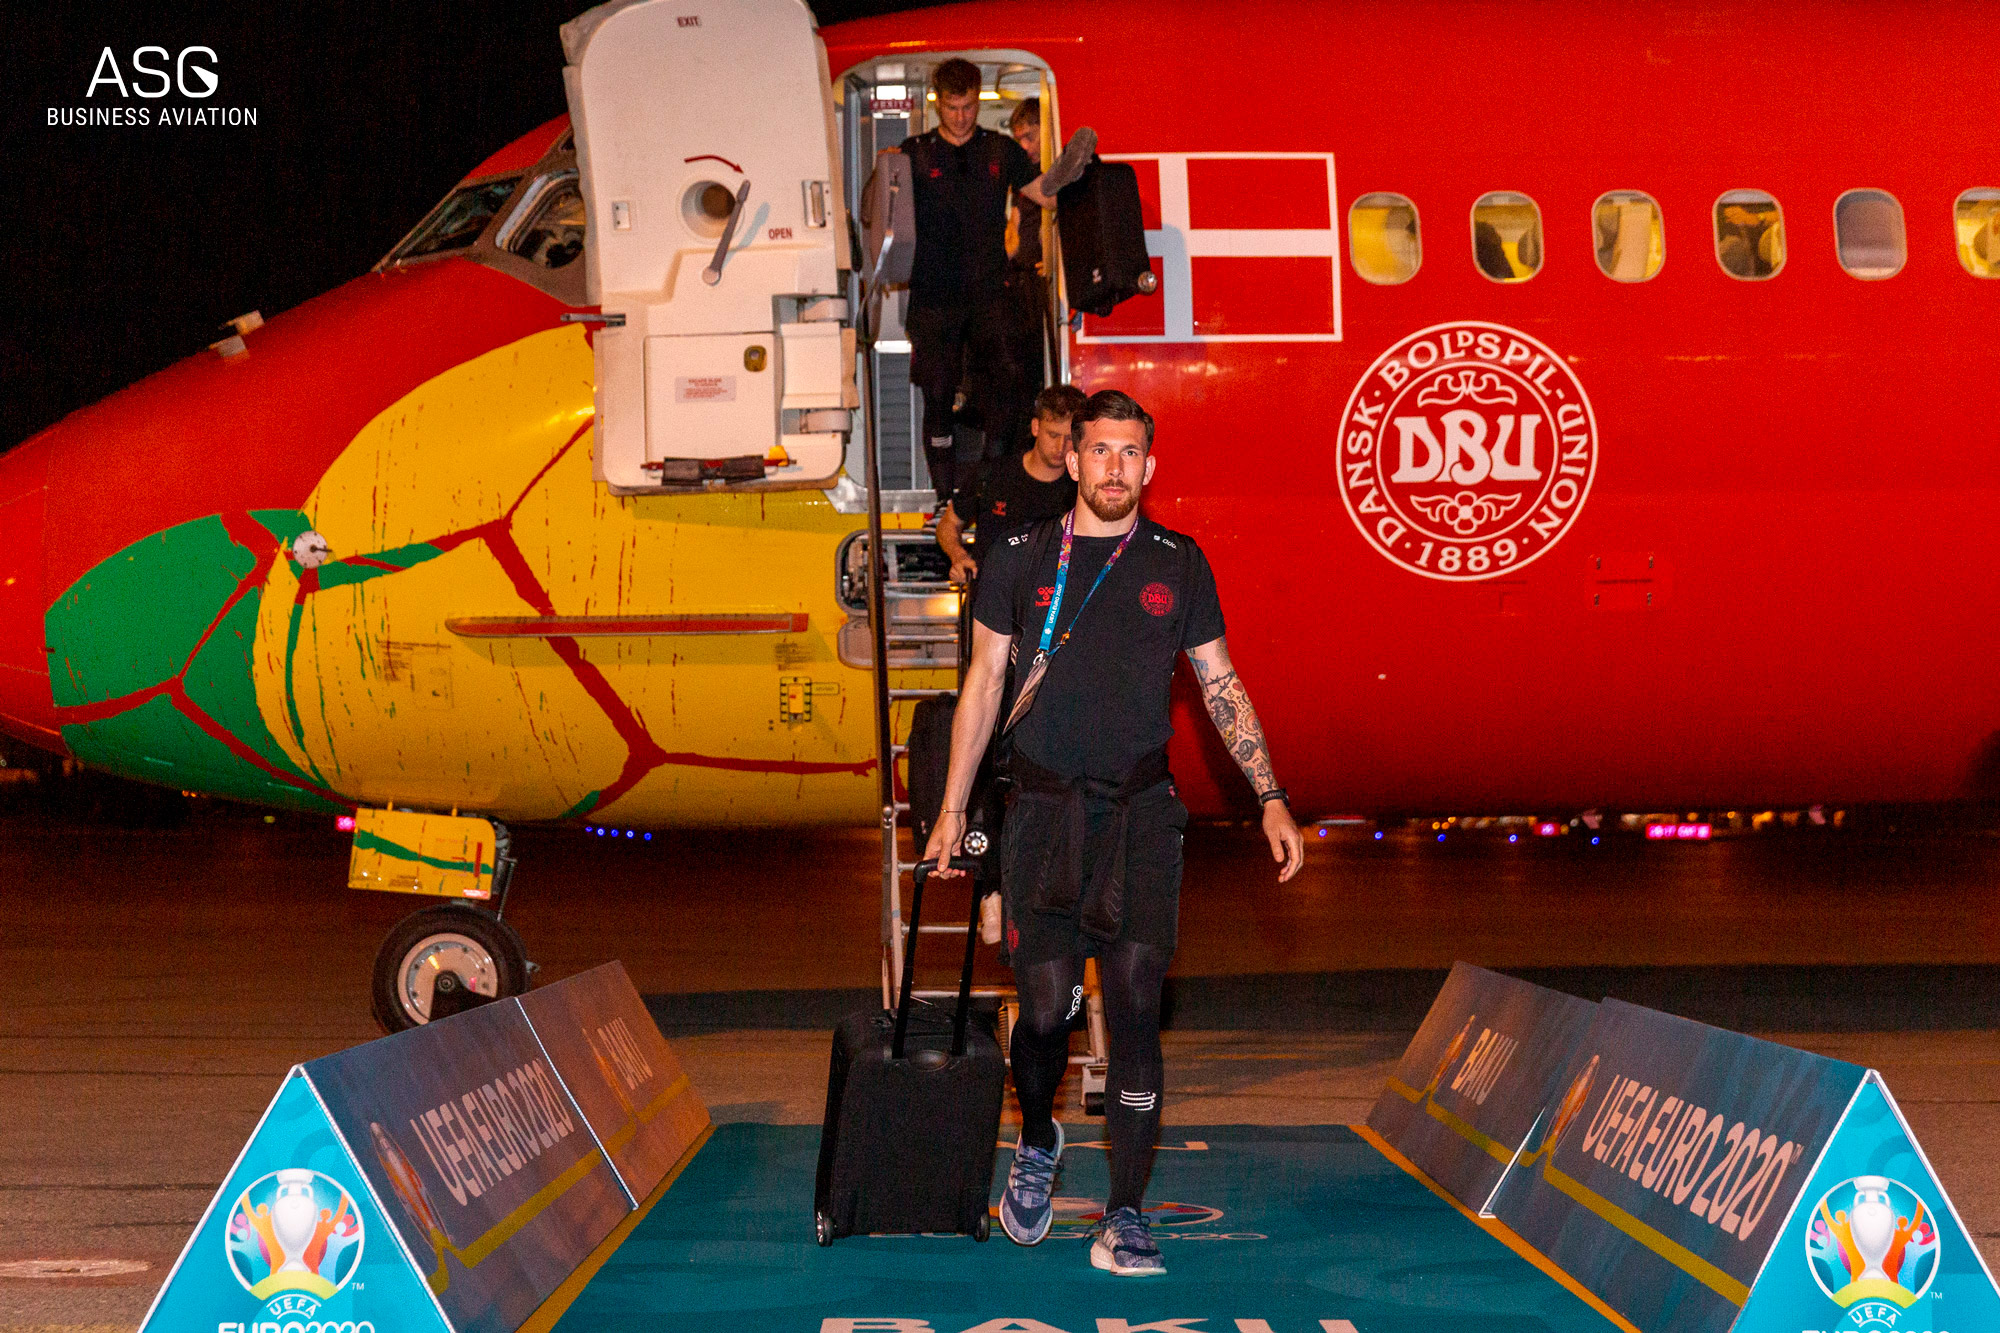 ASG Business Aviation hosted football players of the ¼ final of EURO 2020